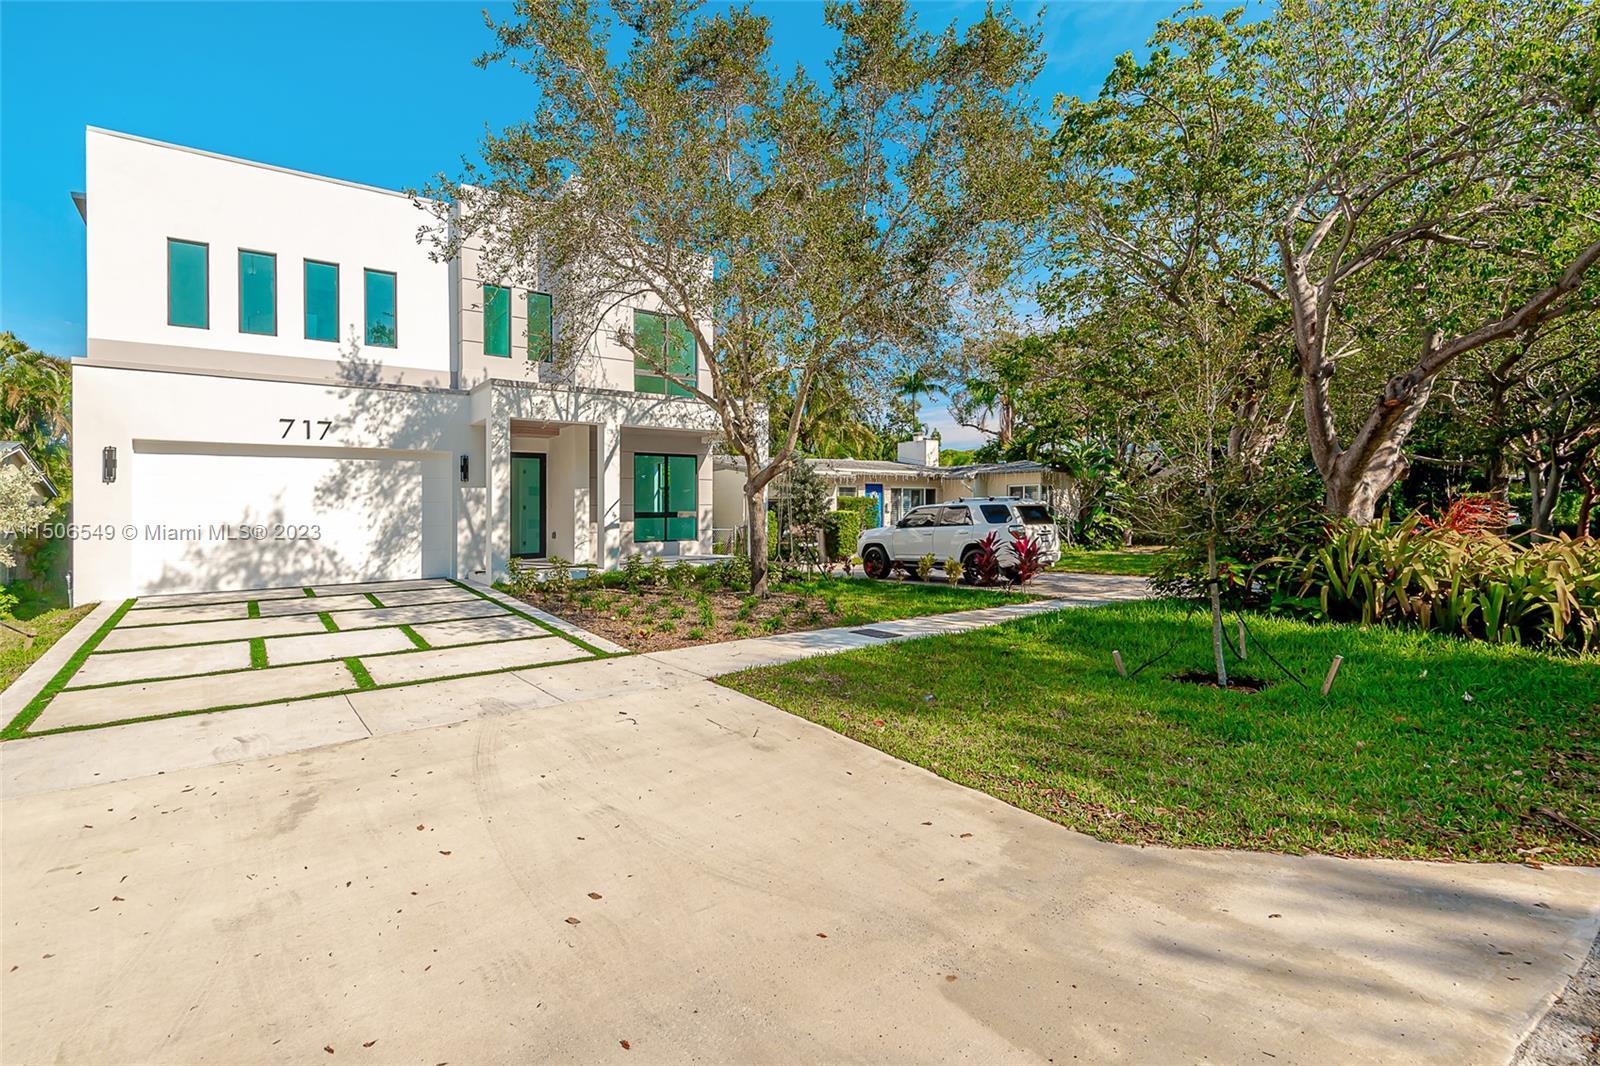 Photo of 717 SE 8th St in Fort Lauderdale, FL